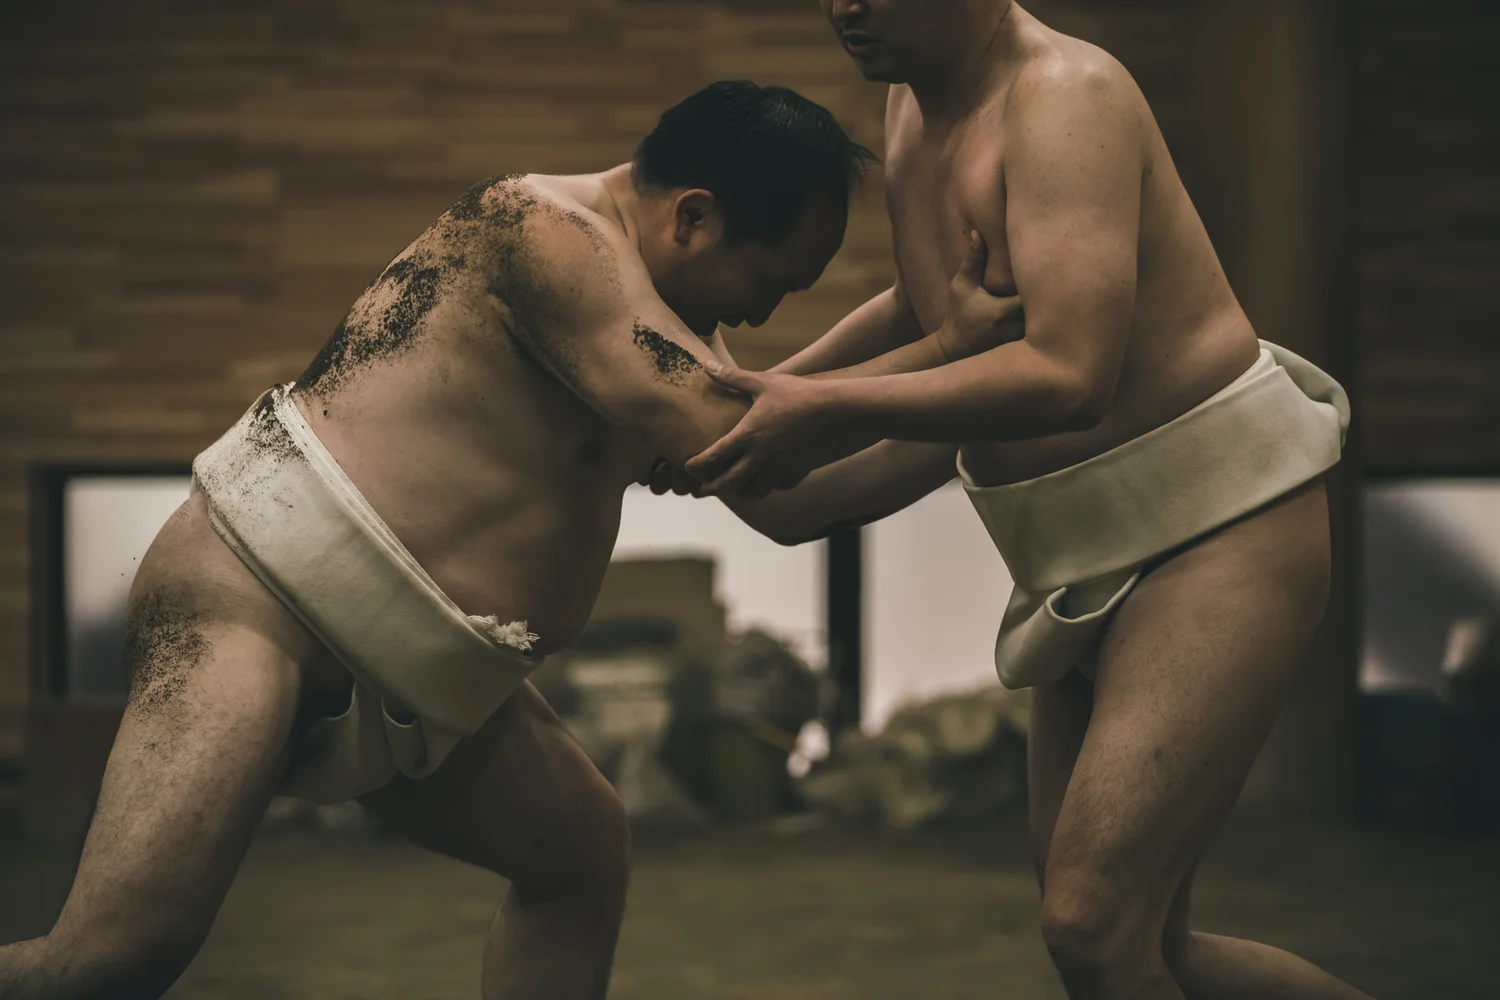 Tokyo Sumo Stable Tour — Watch Morning Sumo Training